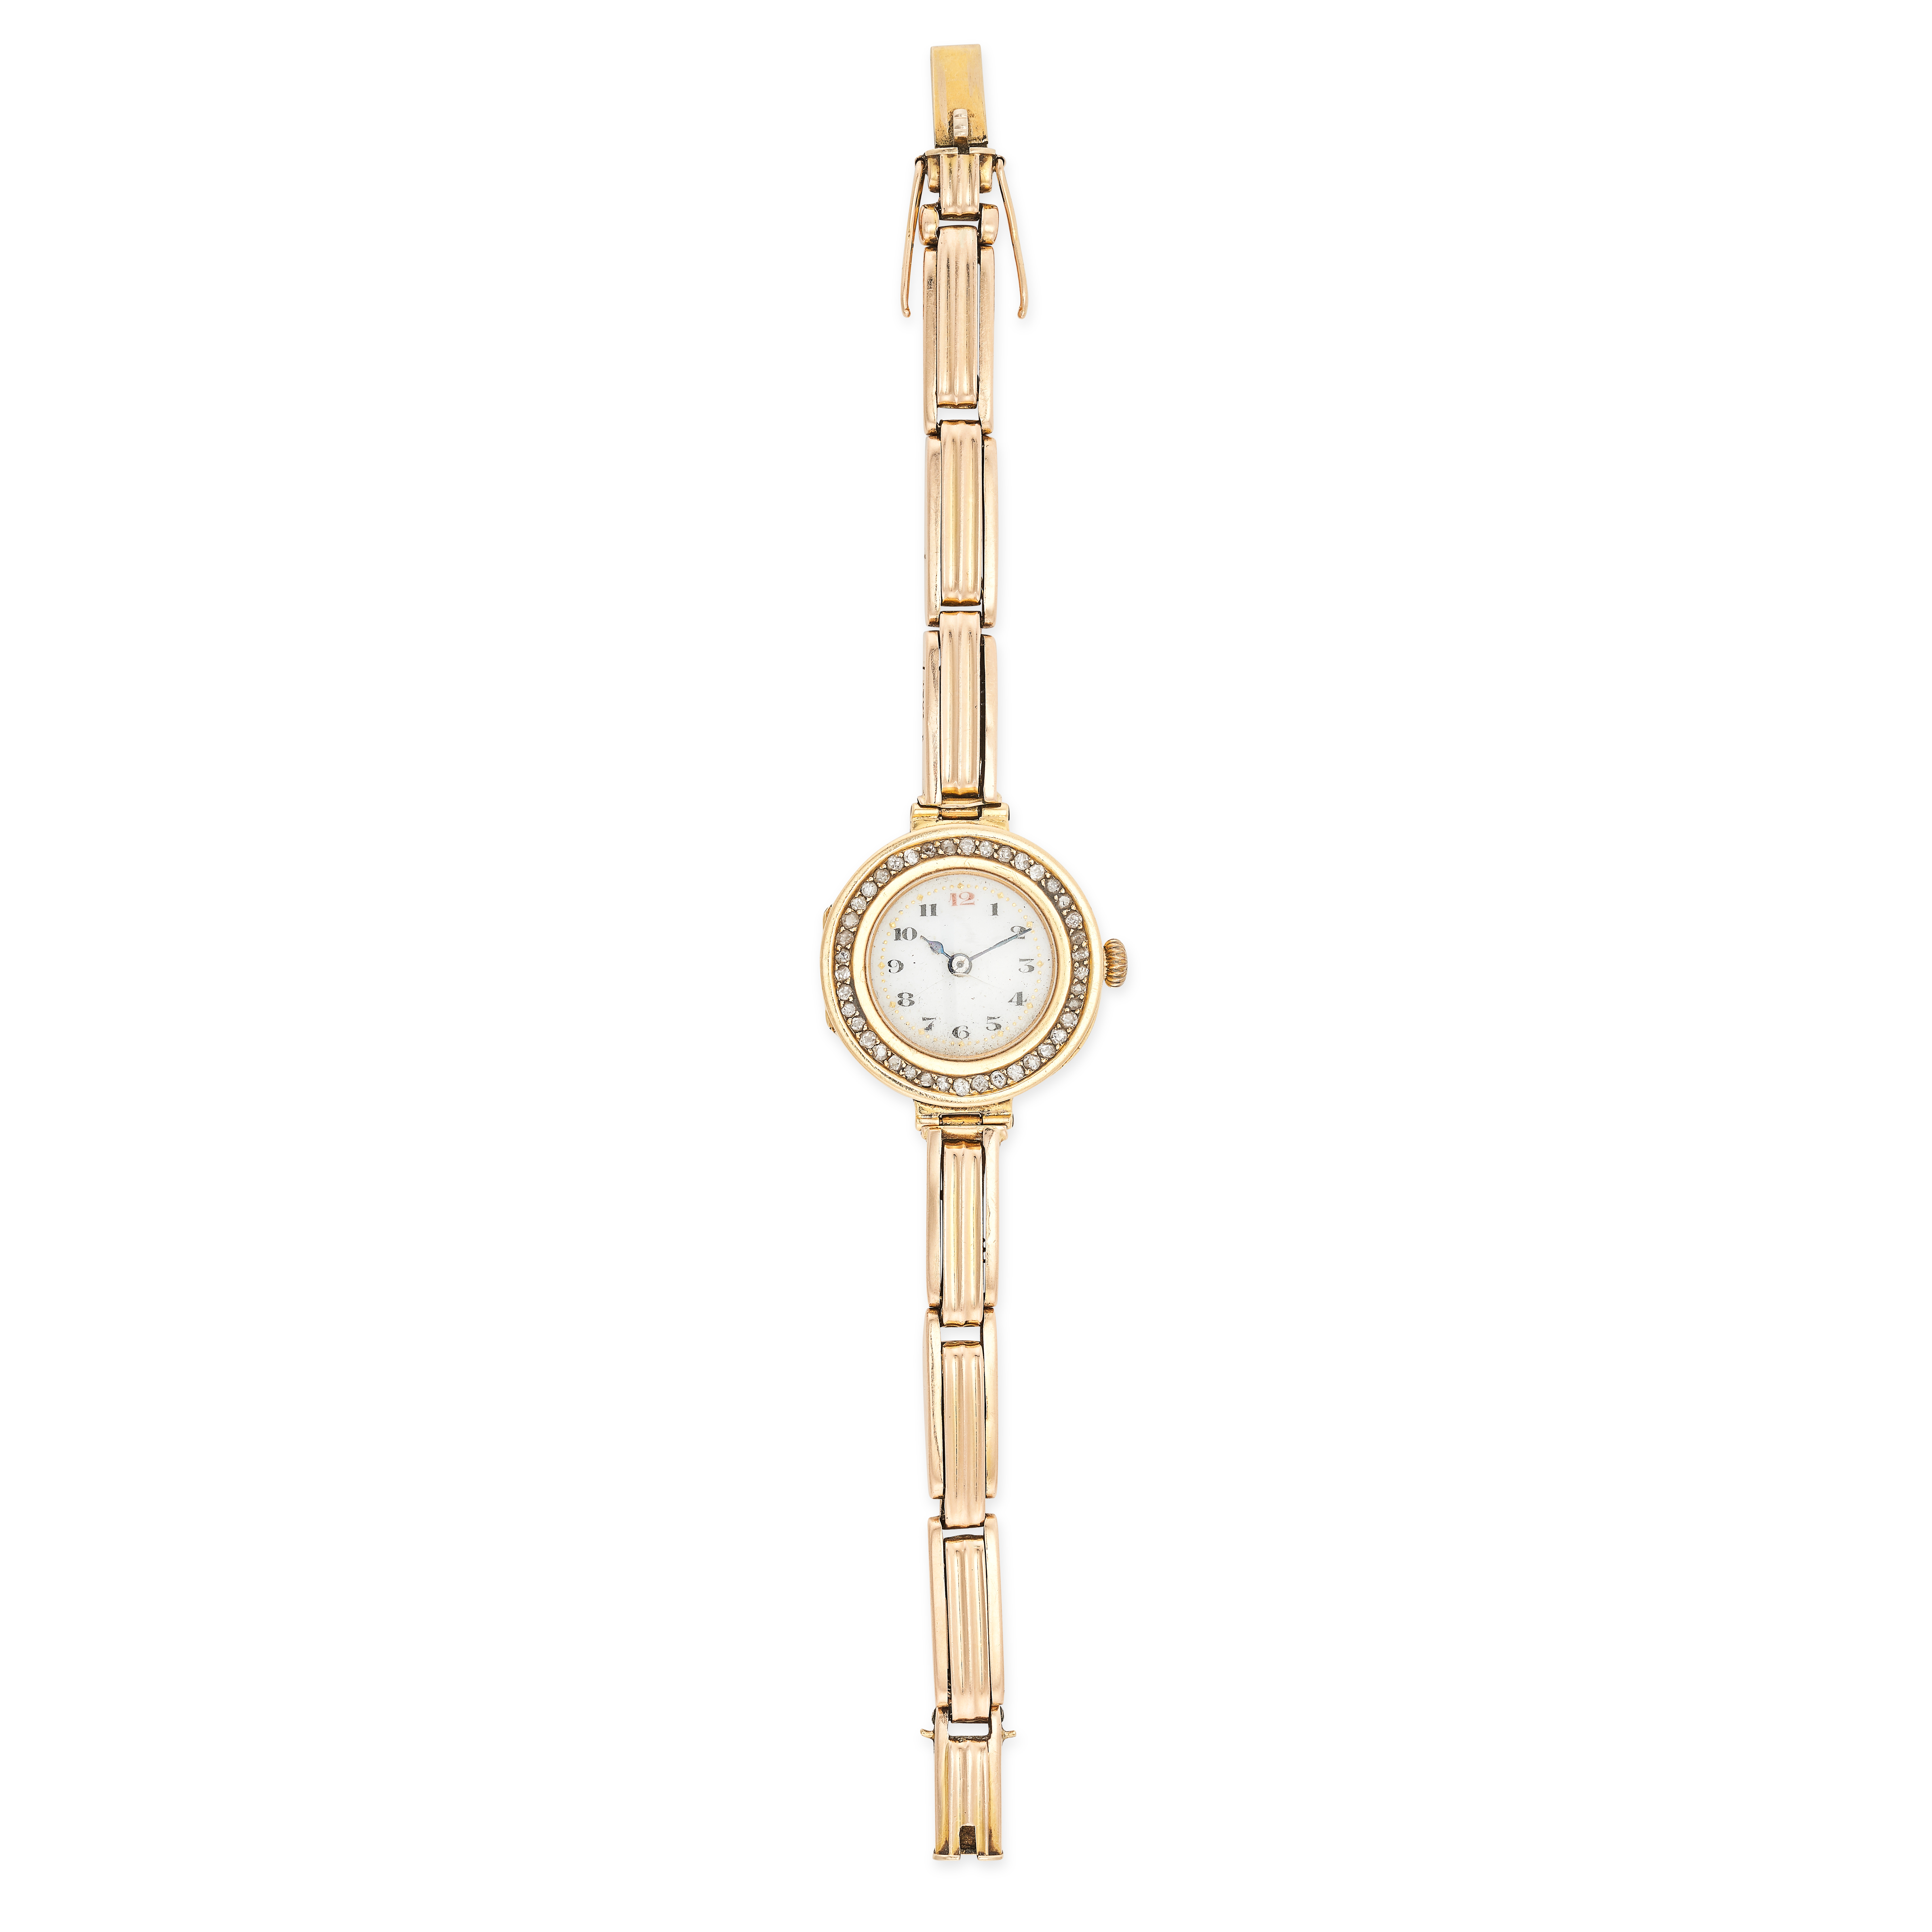 A VINTAGE LADIES DIAMOND WRISTWATCH in 15ct yellow gold, comprising a circular watch face on a